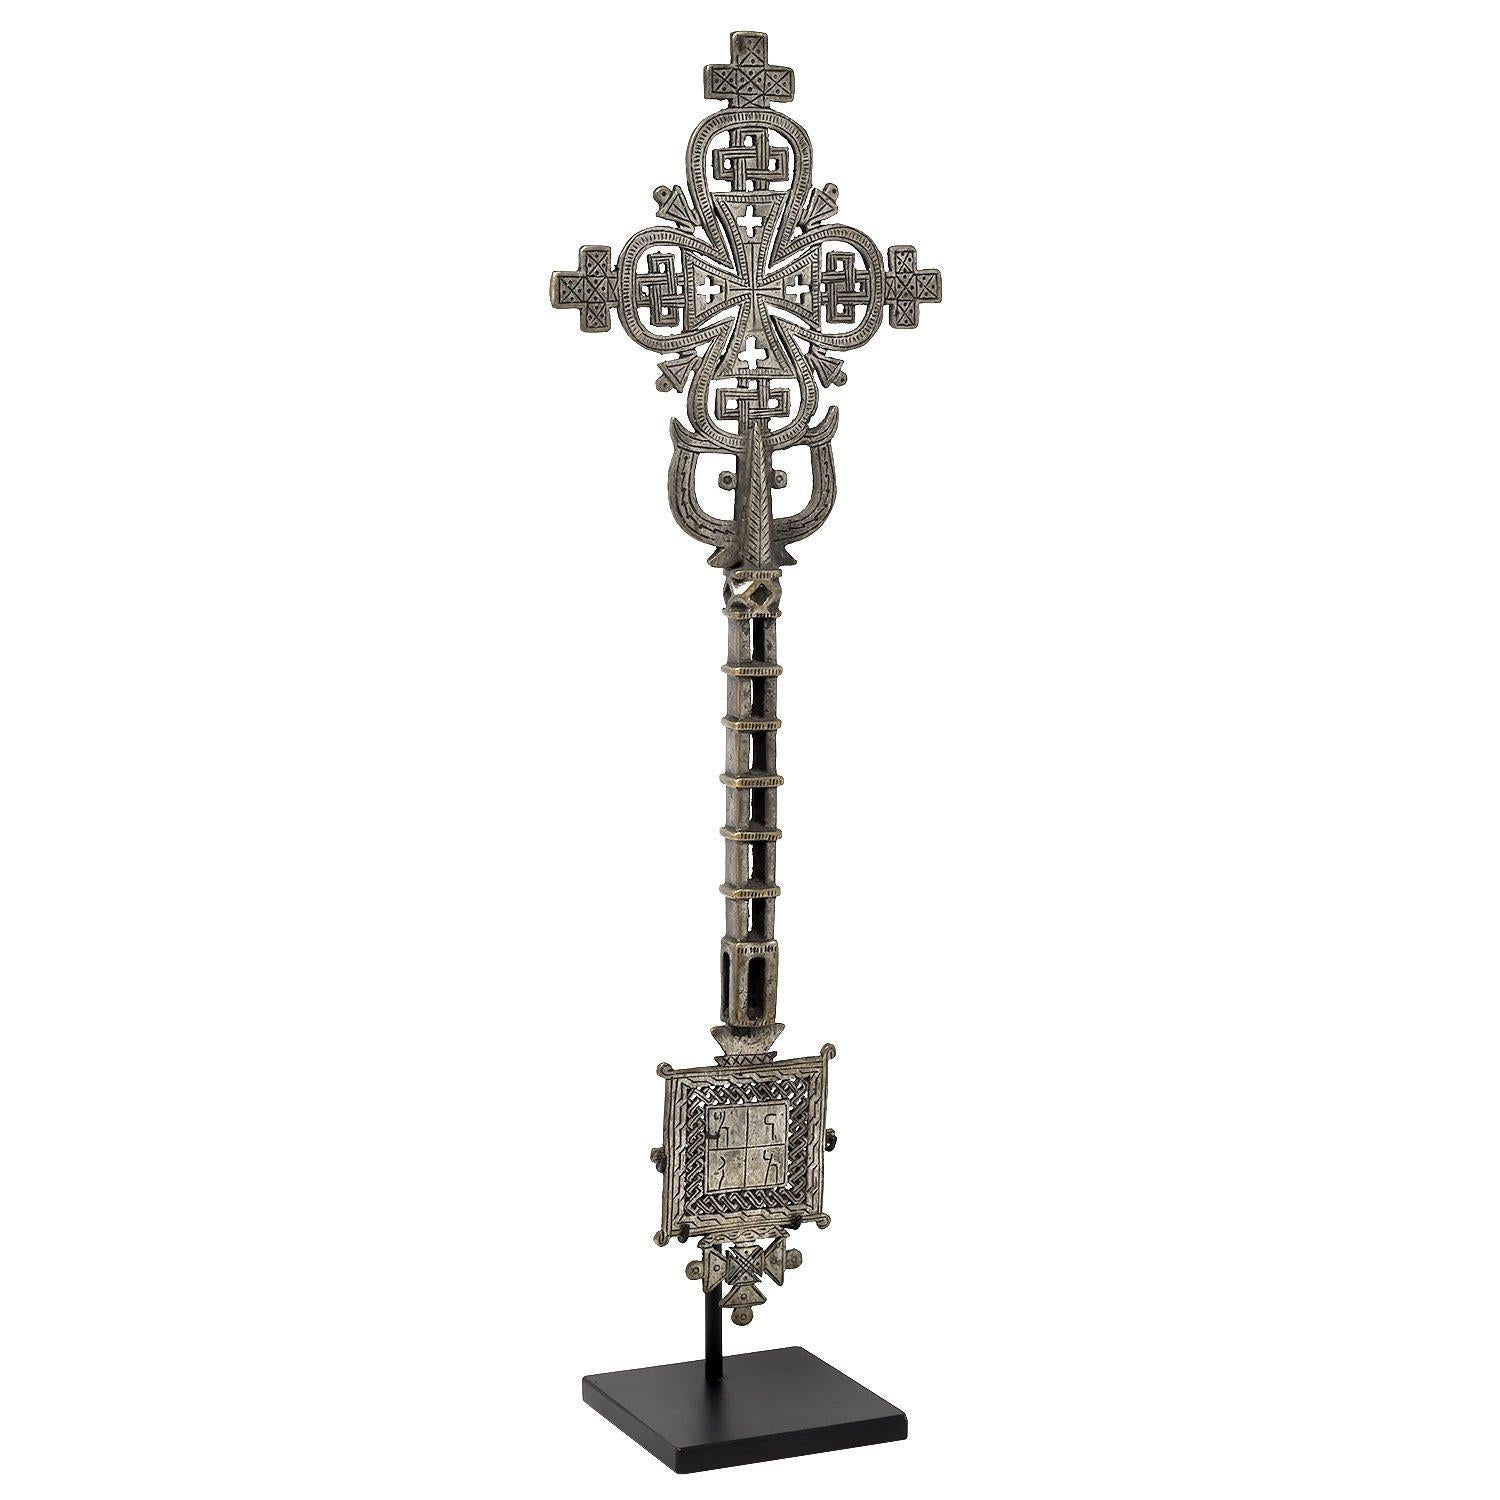 Coptic hand cross, Ethiopia

Carried by hand during services
Silver-plated copper alloy
Mid 20th century
Measures: 17.75 x 5.75 x 0.625 in. / 45 x 15 x 1.5 cm
Height on custom display stand: 19.25 in. / 49 cm.